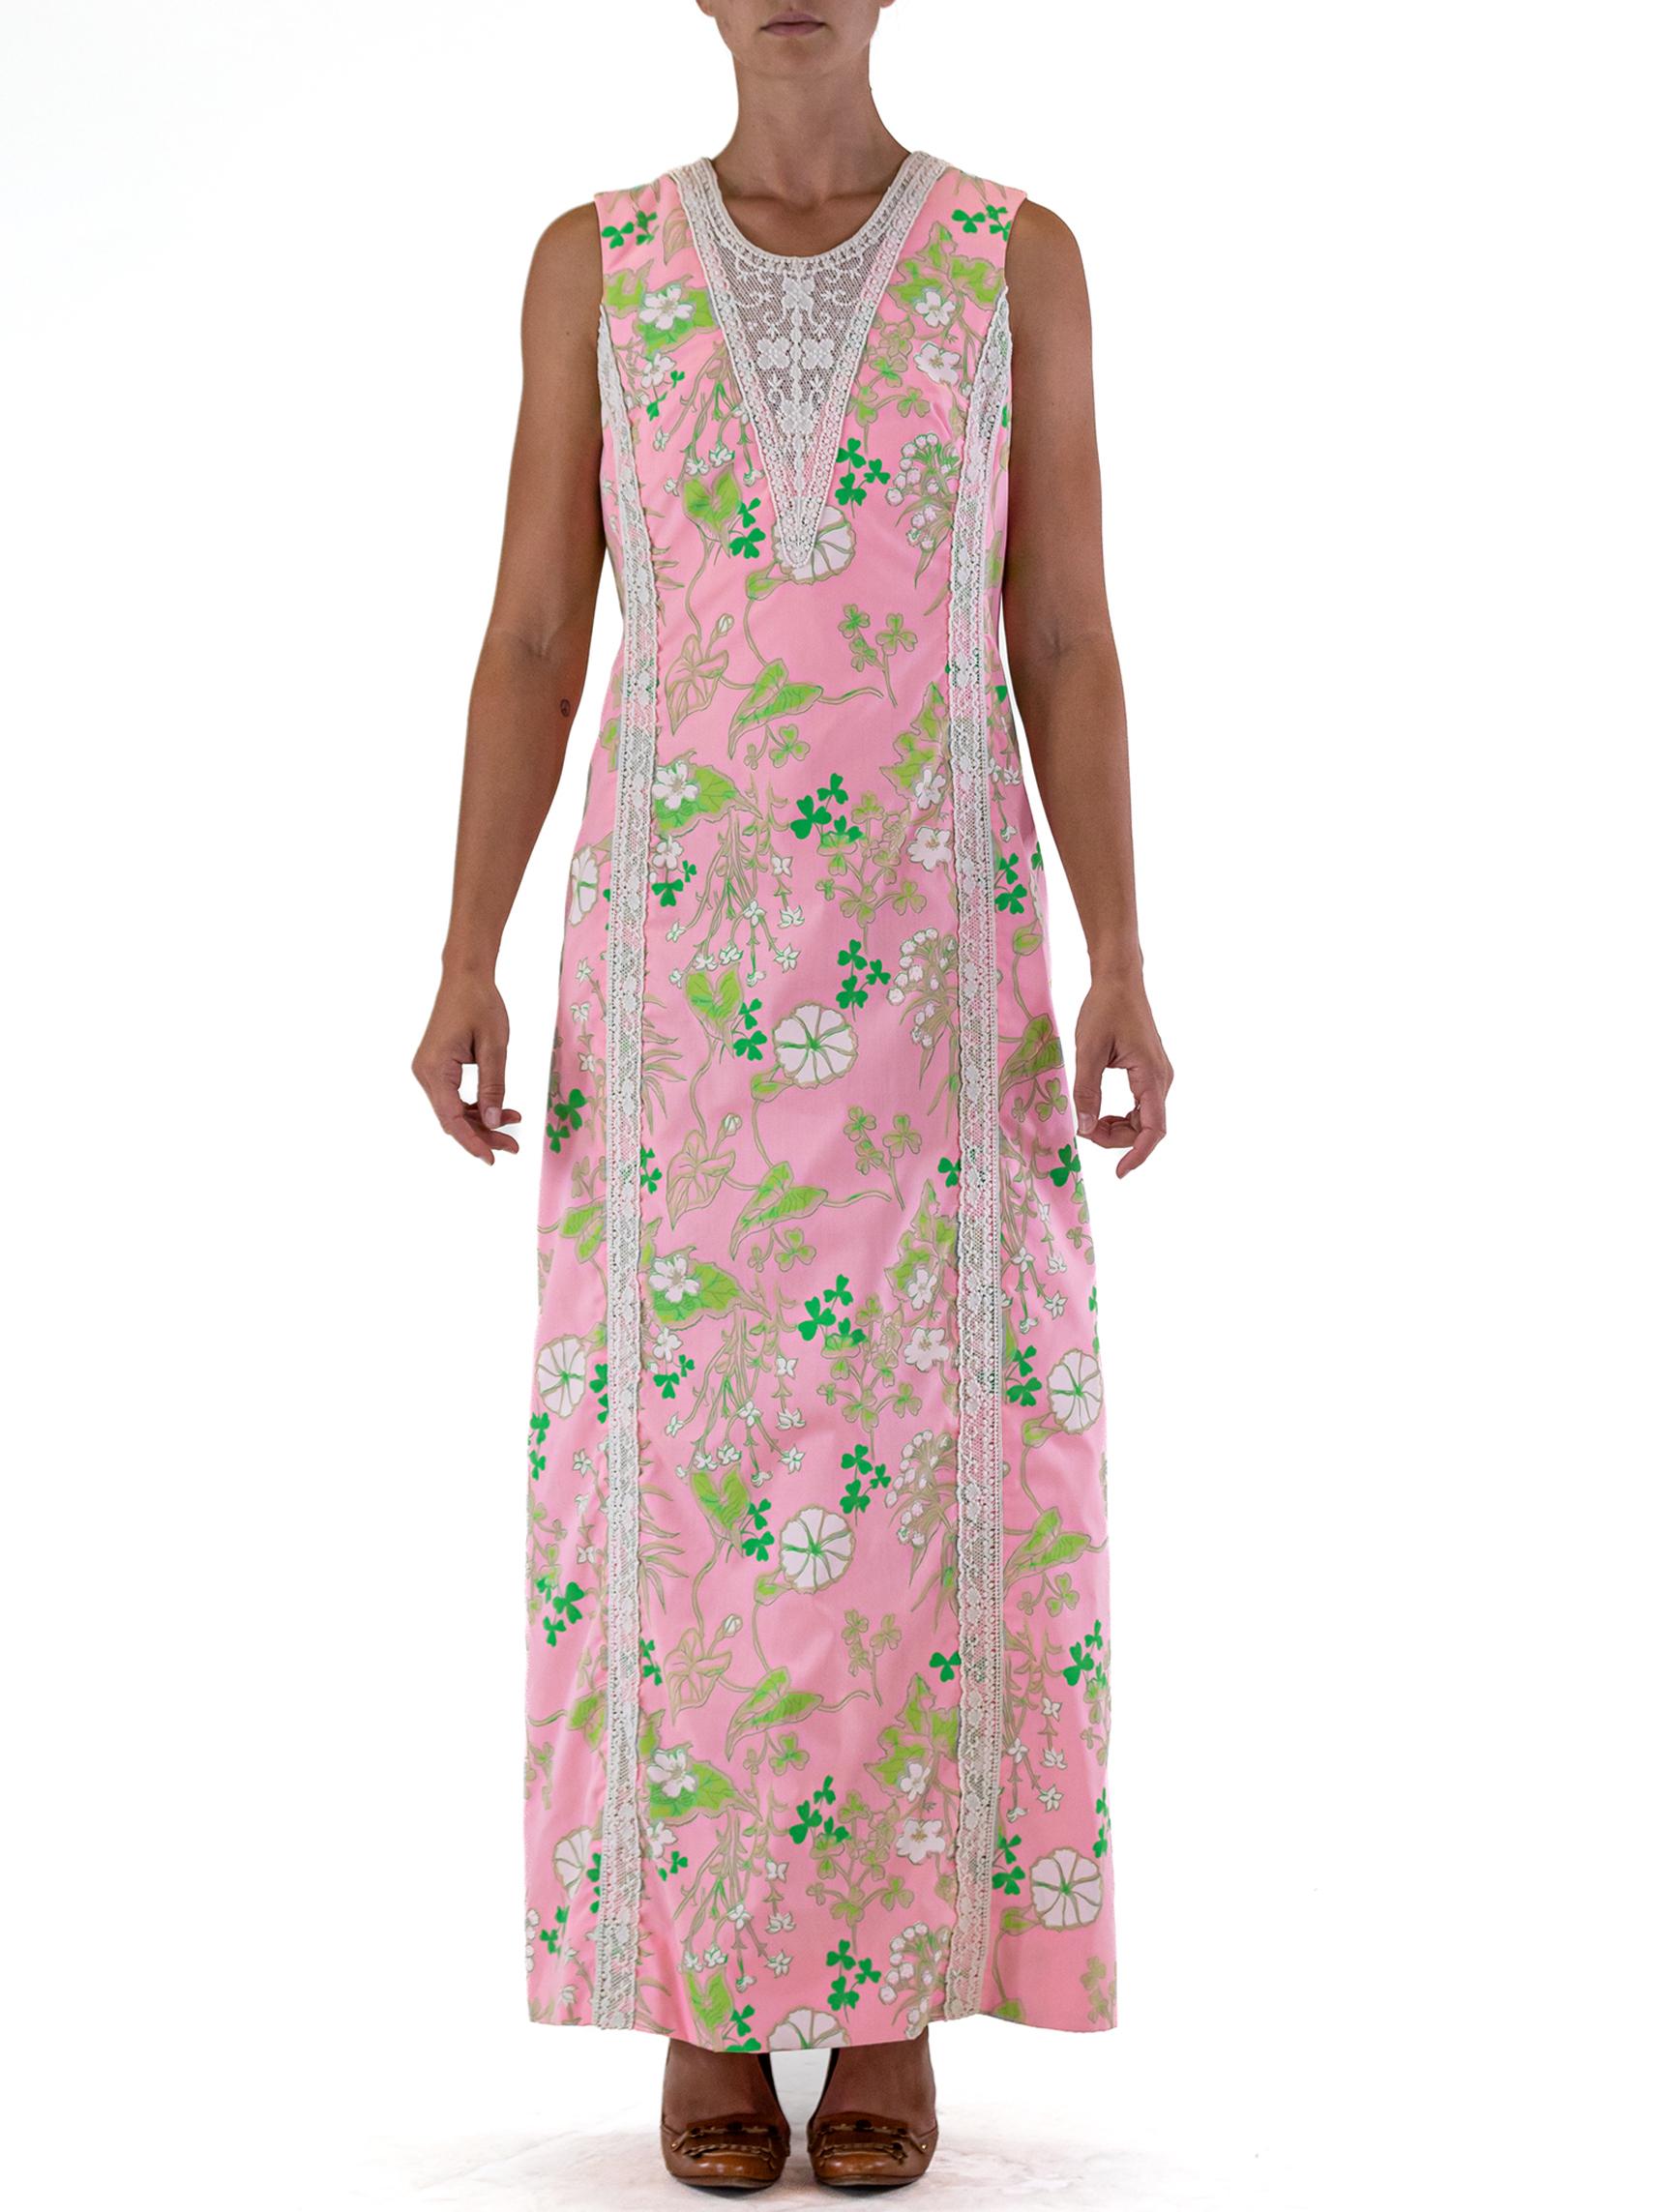 Women's 1960S LILLY PULITZER Pink Green With Lace Dress